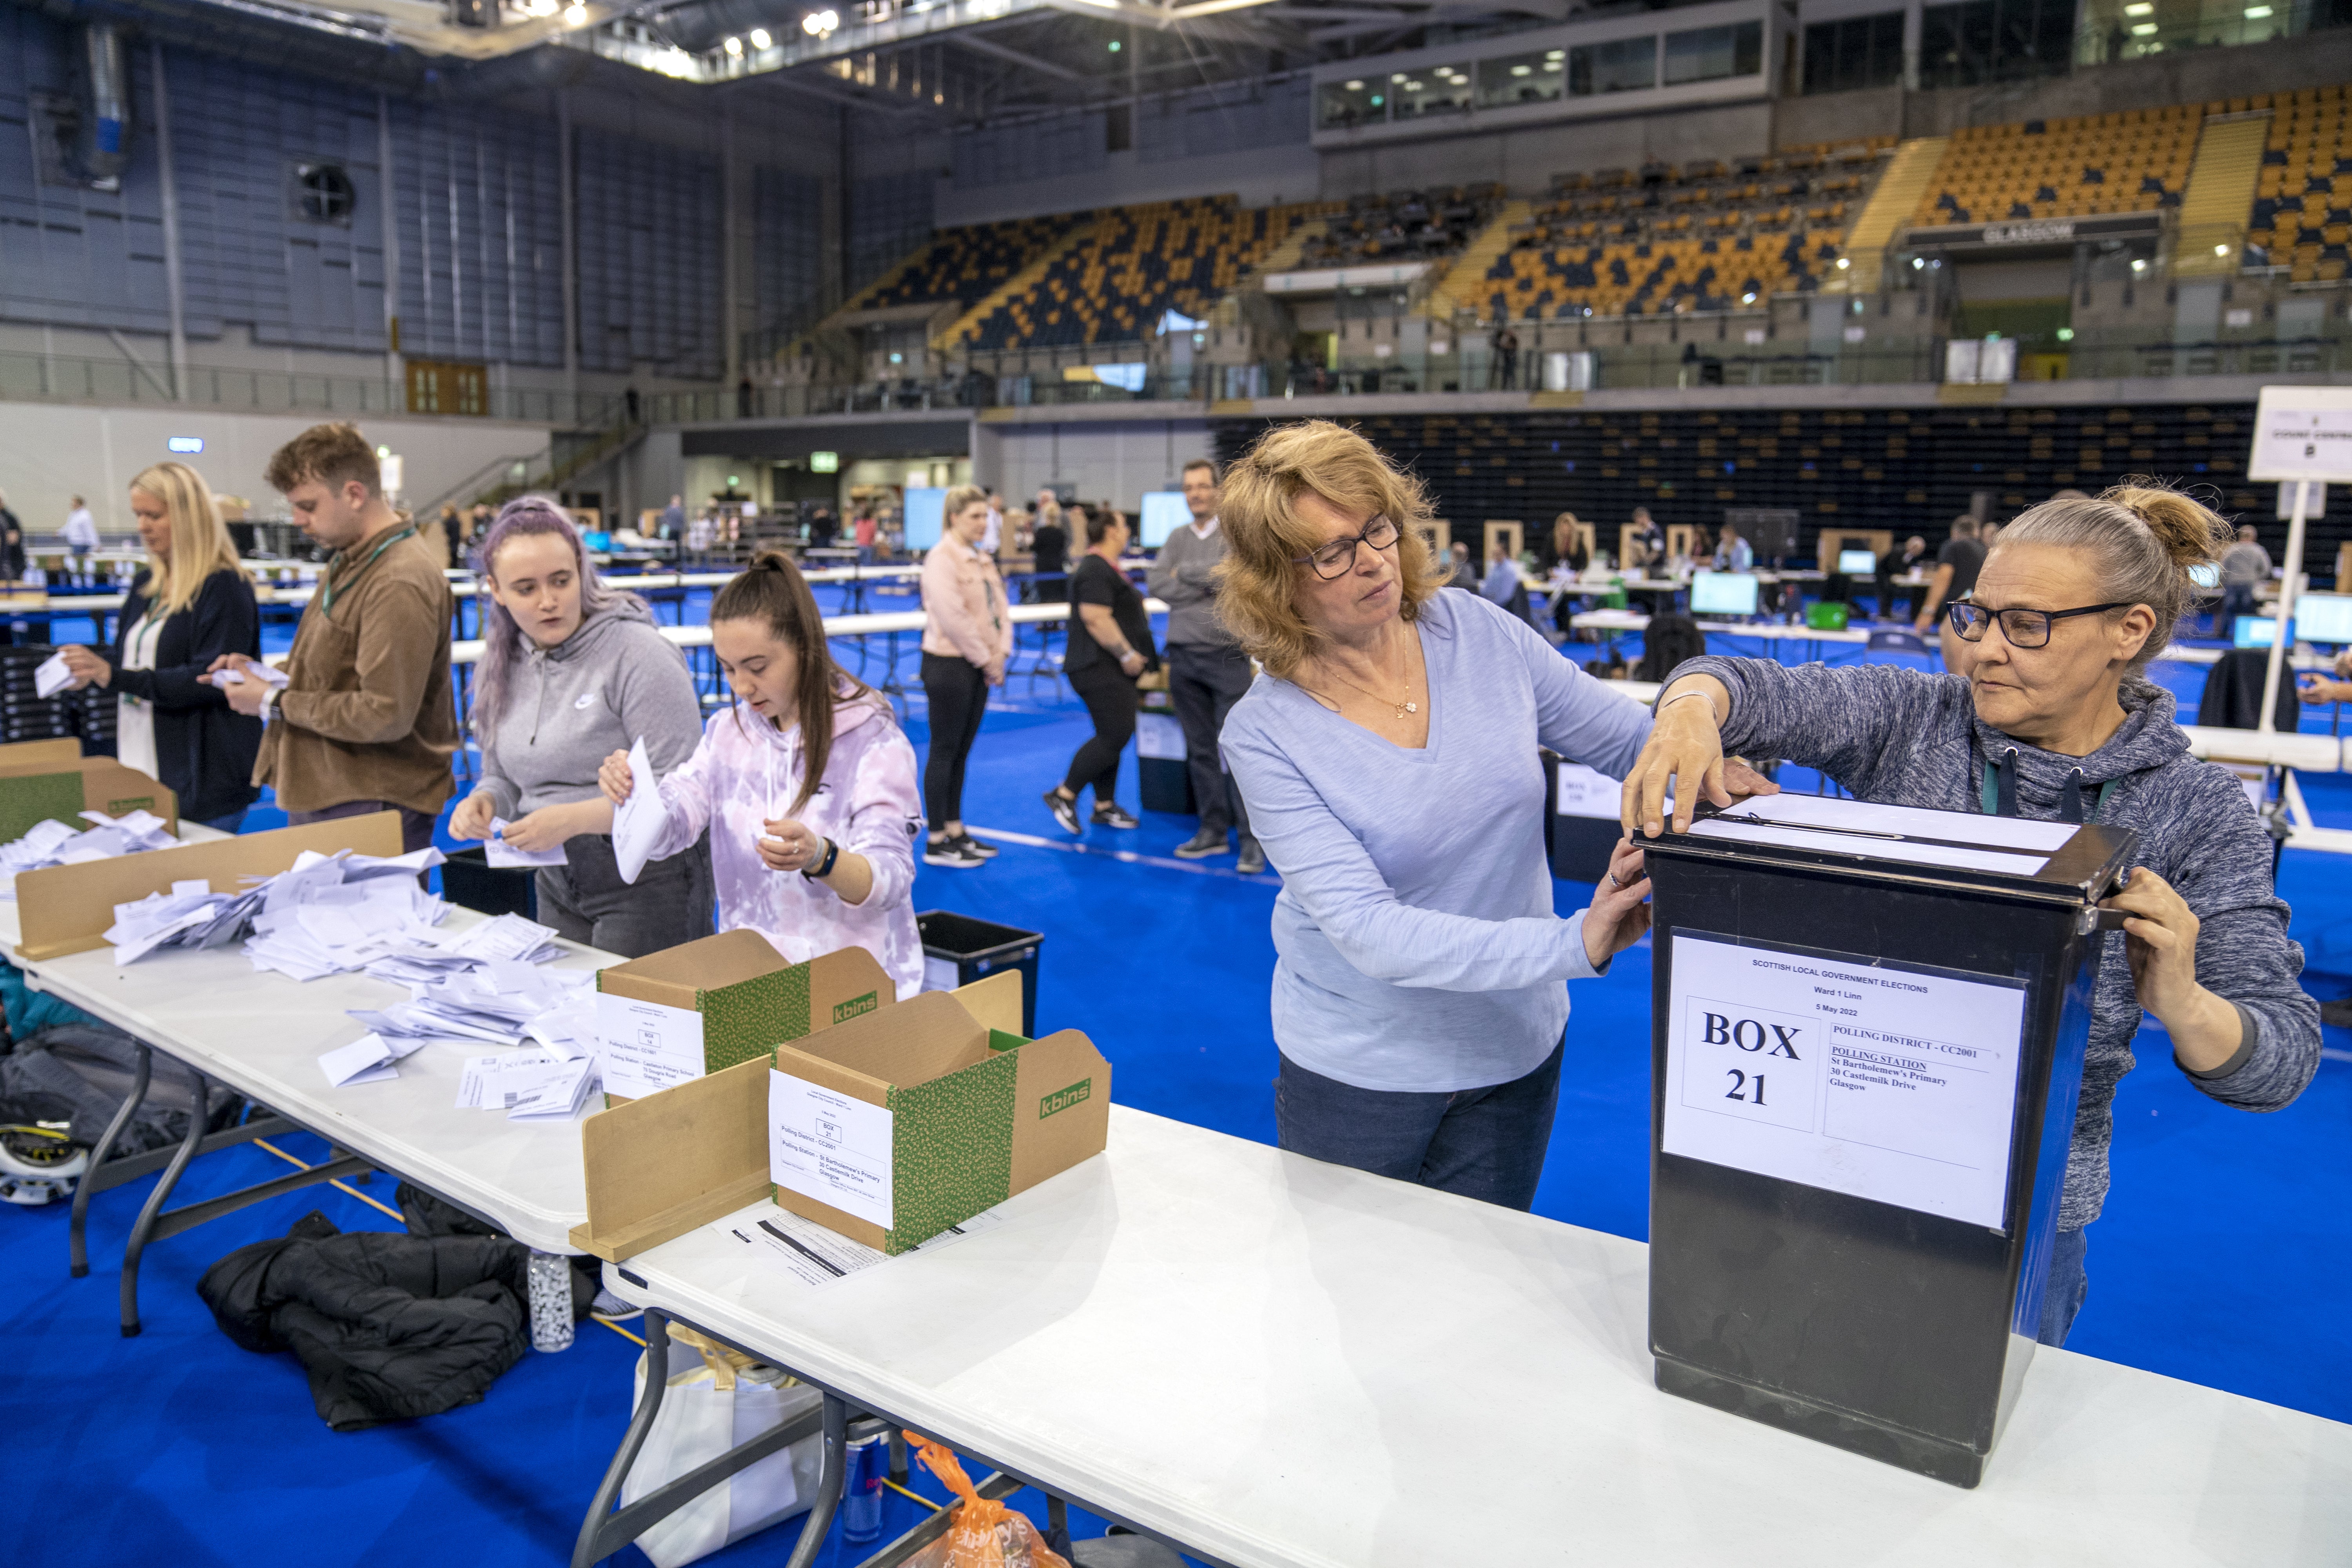 Ballot boxes are opened ready for sorting at the Glasgow City Council count at the Emirates Arena (Jane Barlow/PA)